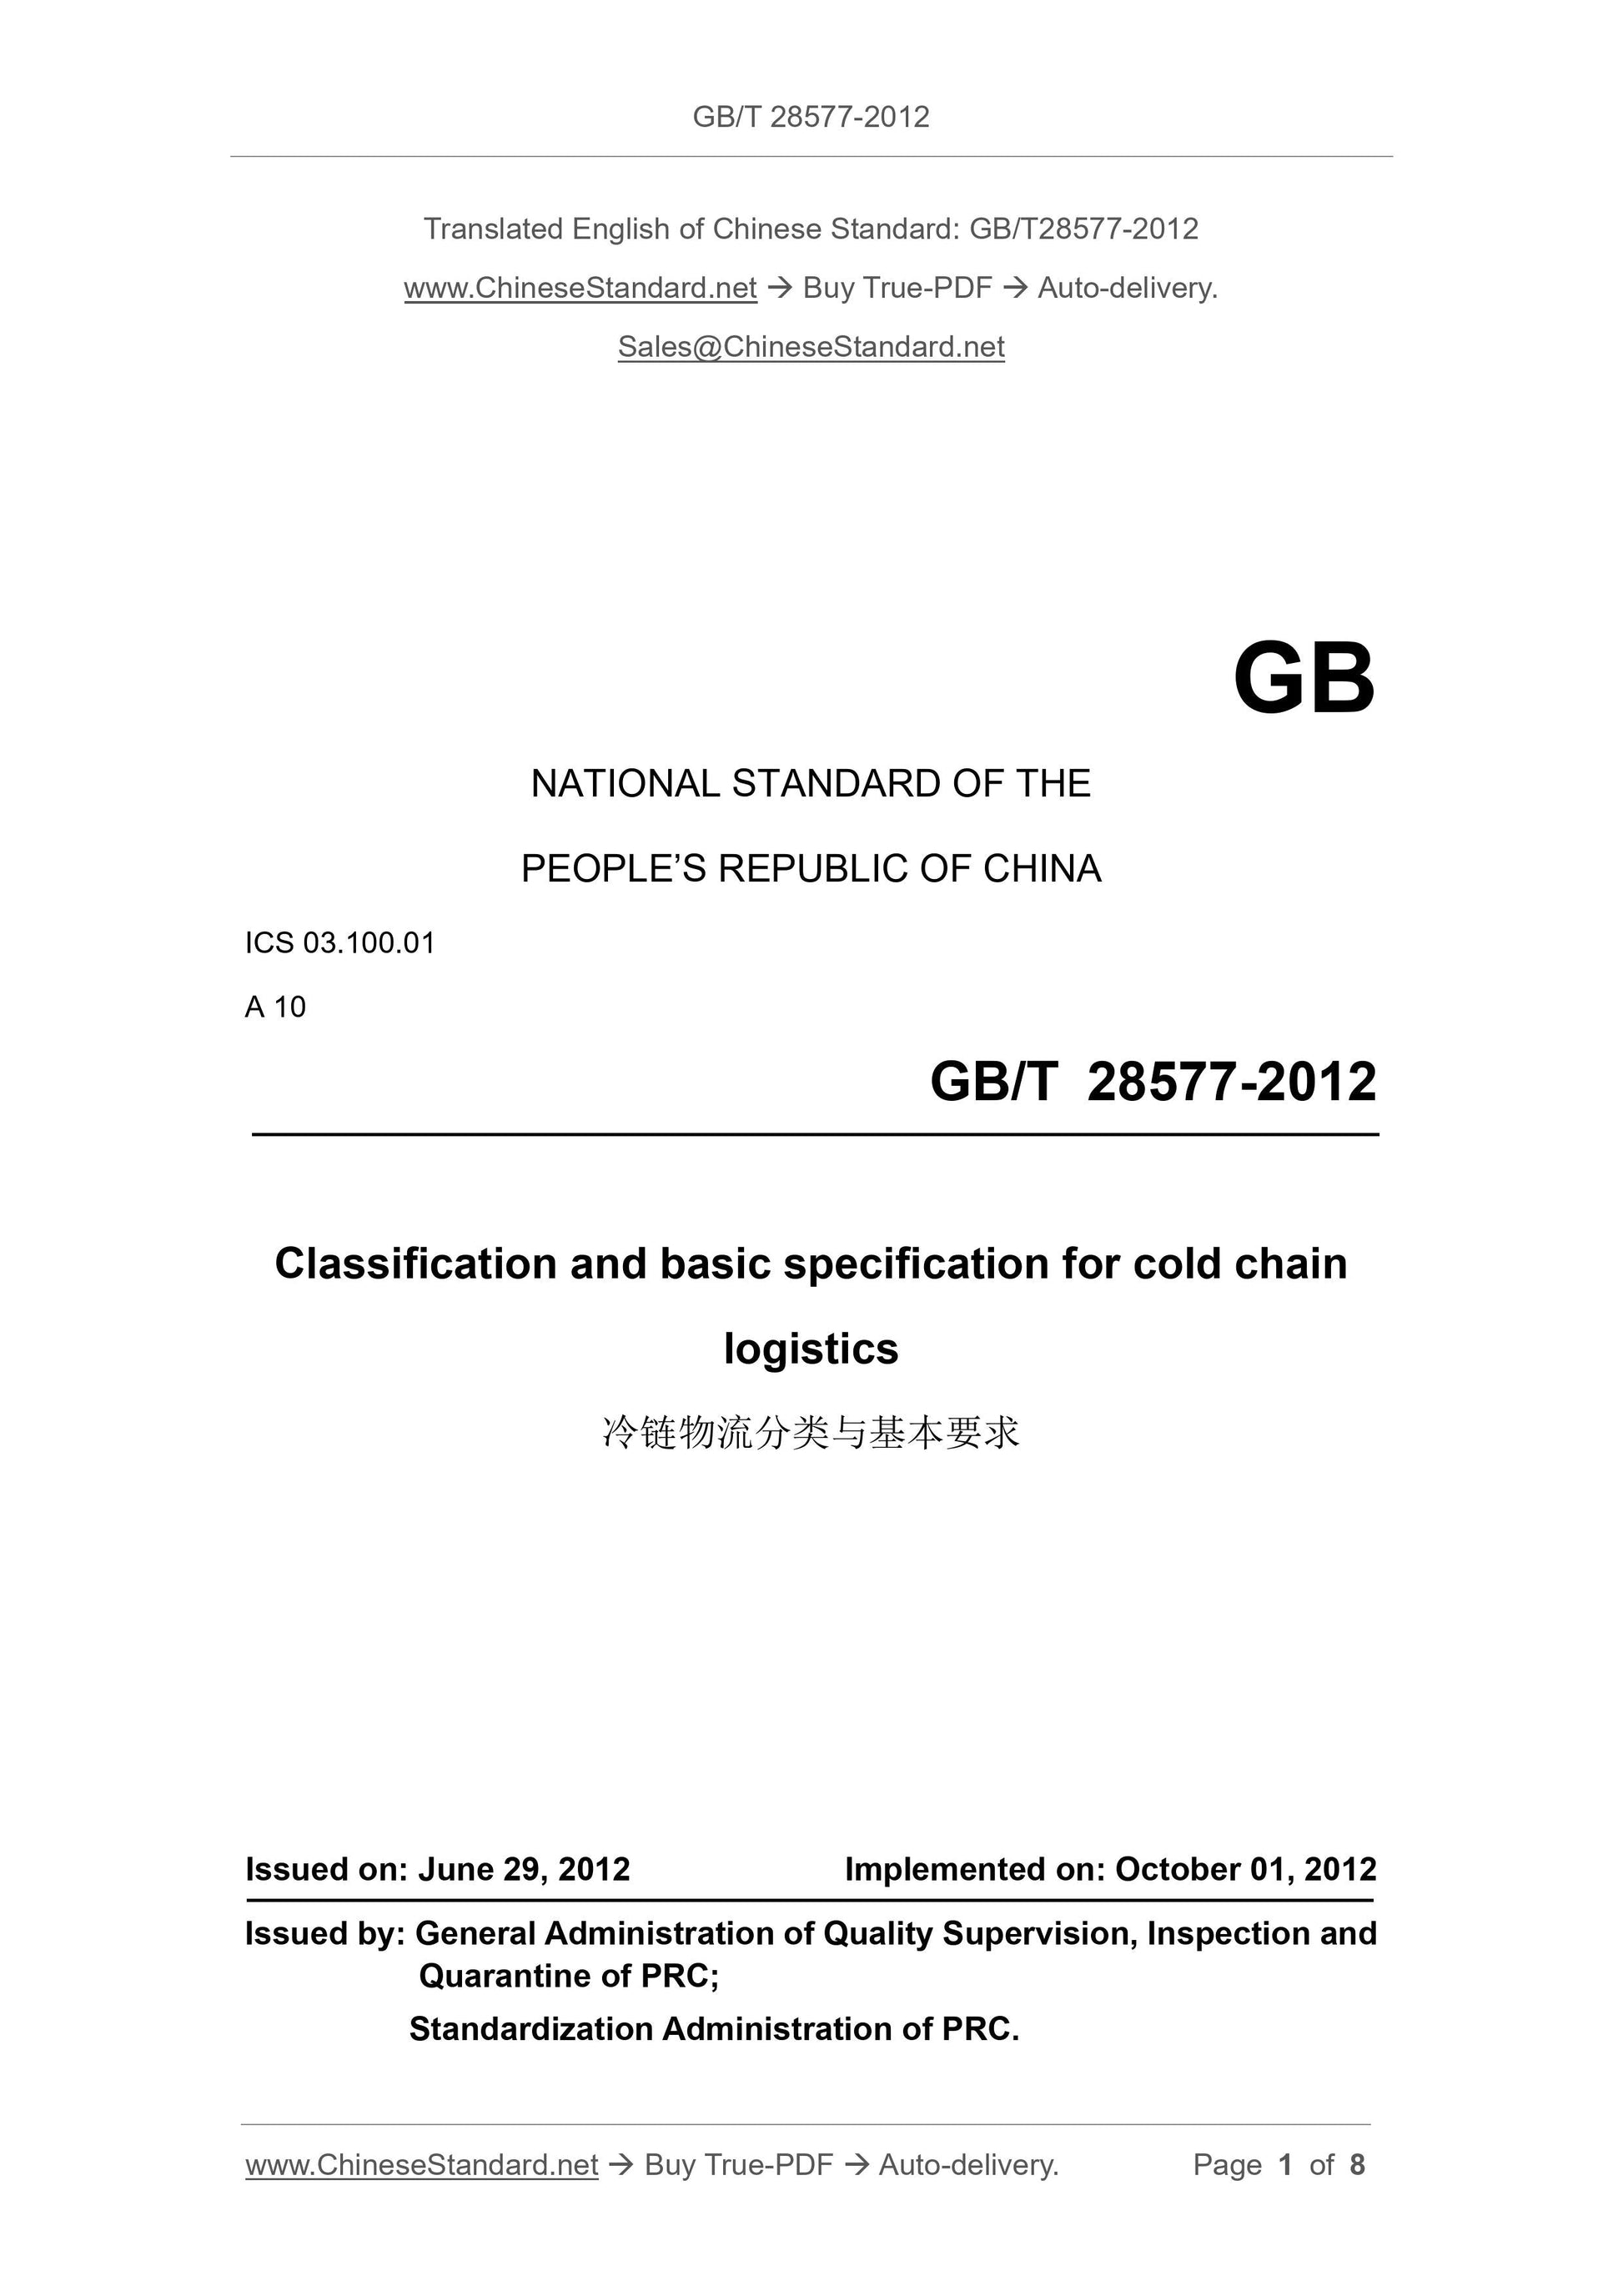 GB/T 28577-2012 Page 1